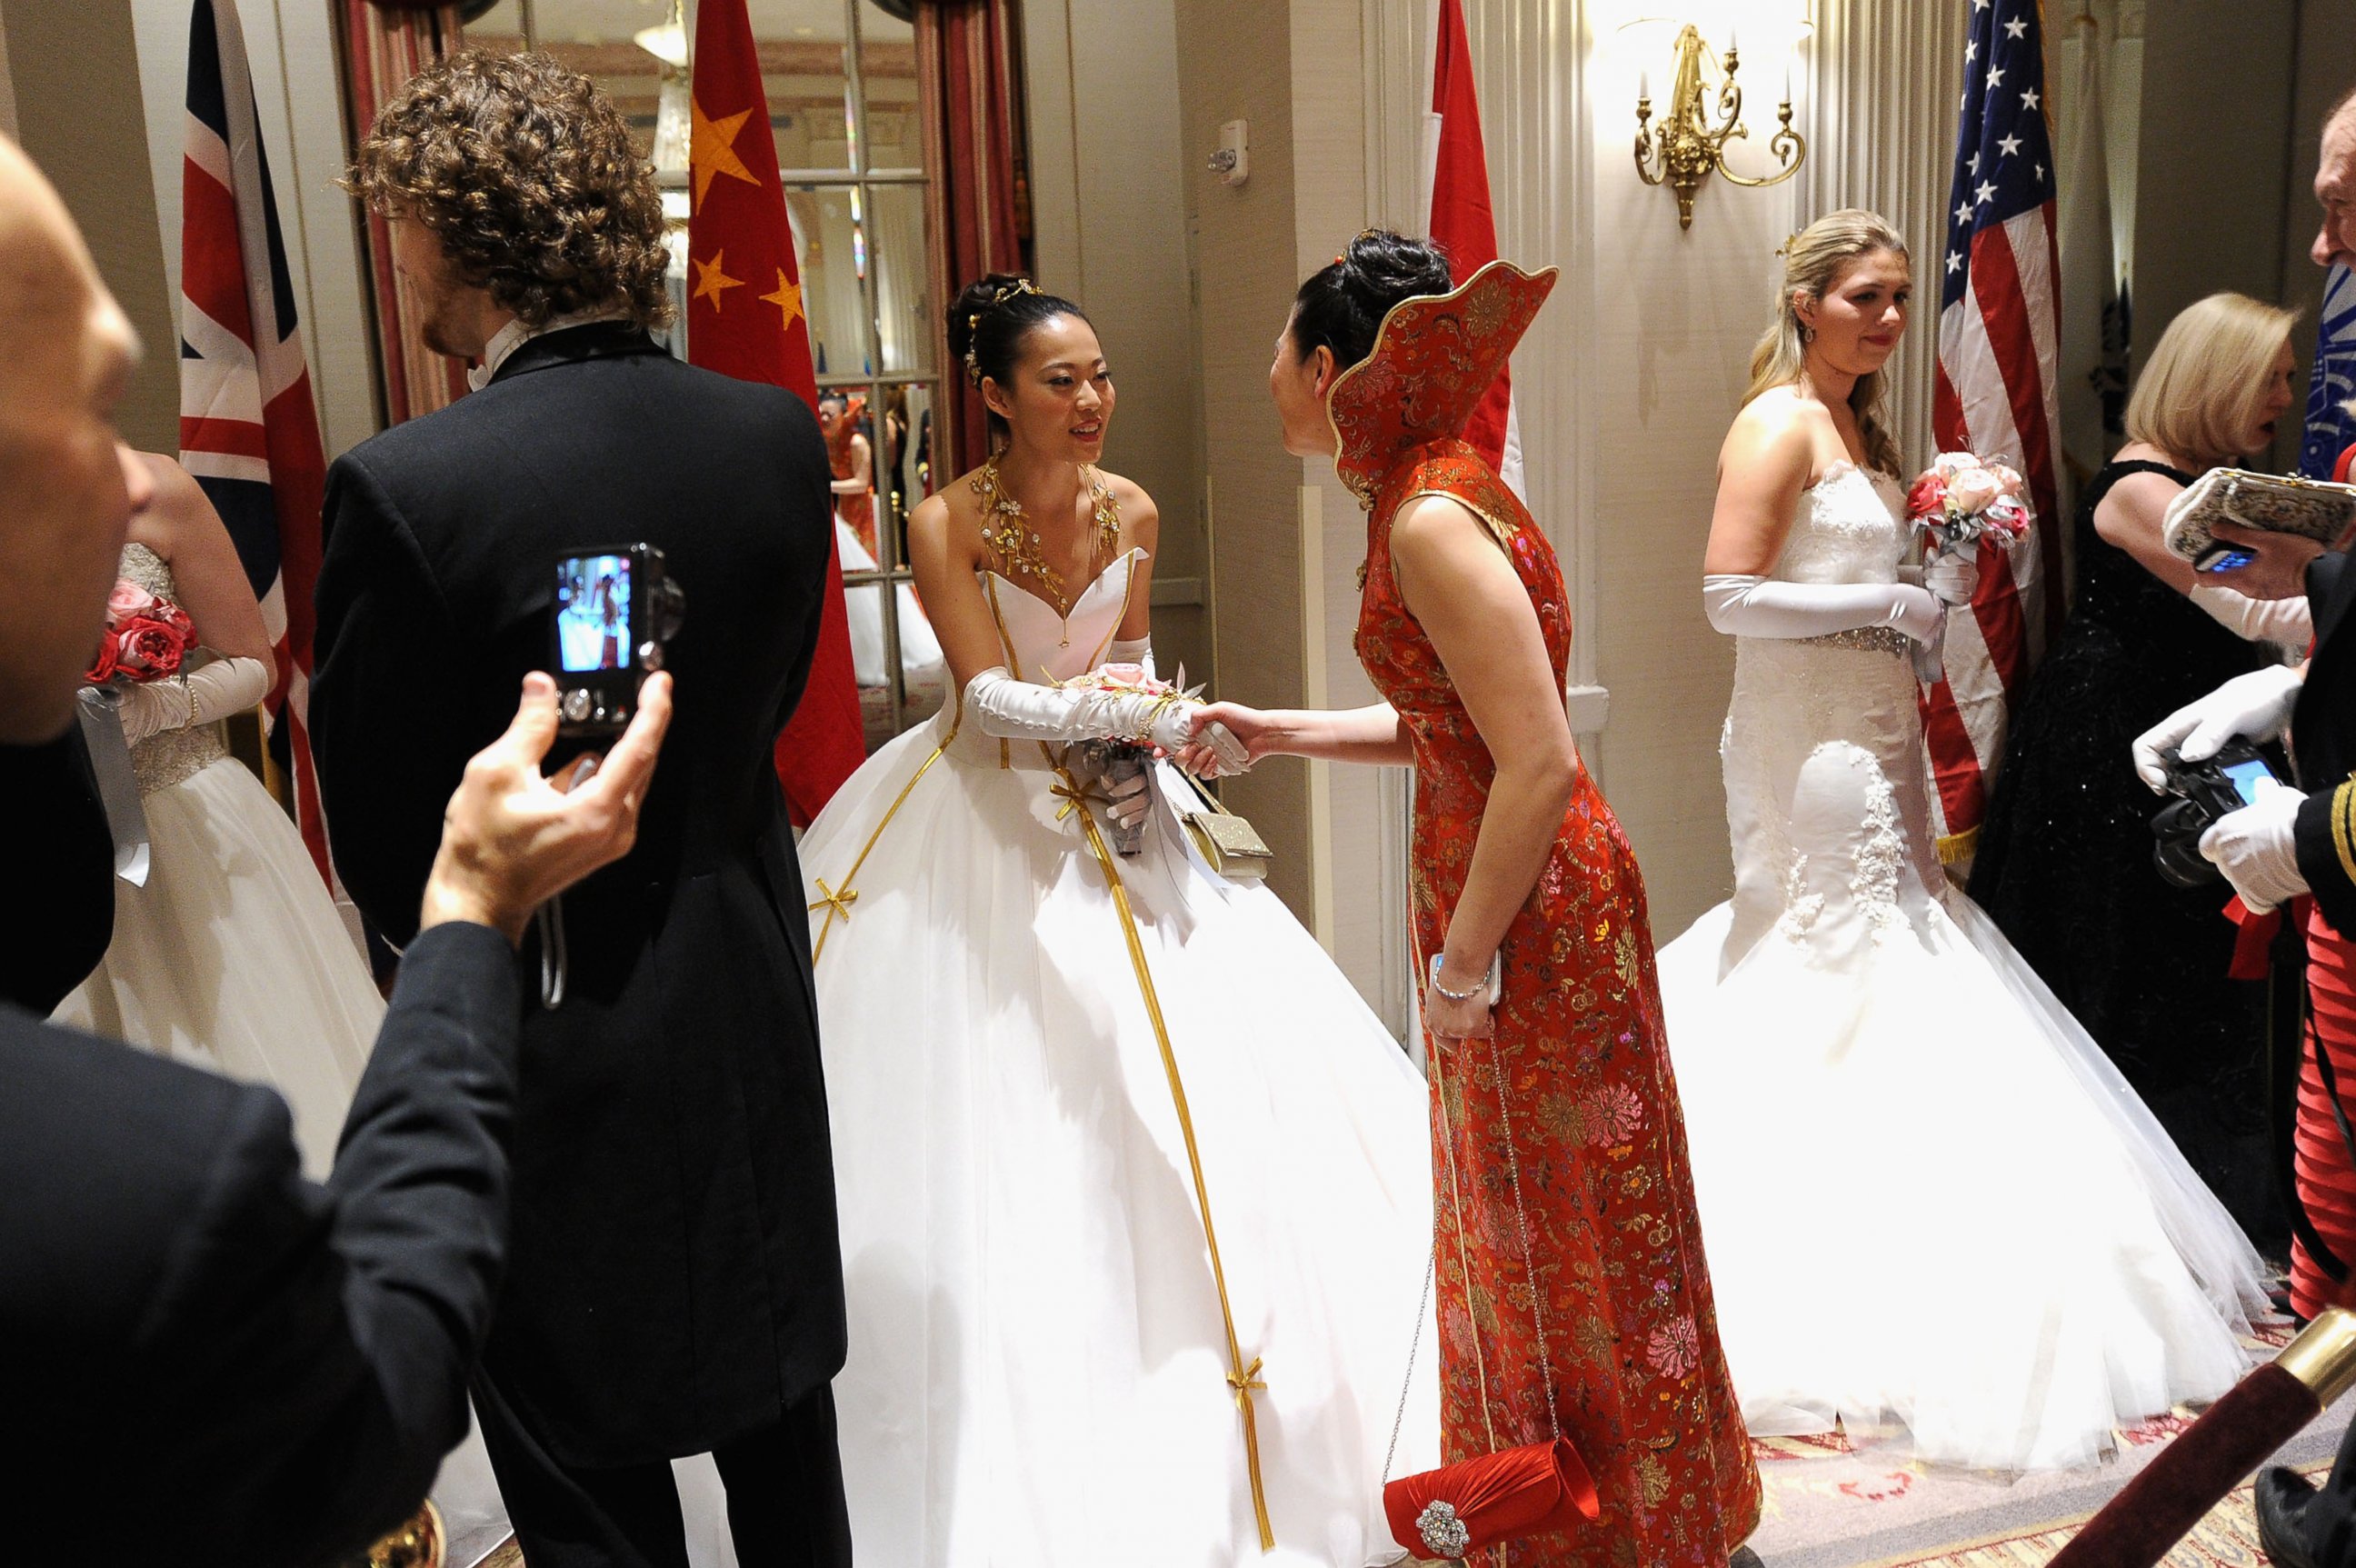 PHOTO: Debutantes and guests attend the 60th International Debutante Ball at The Waldorf Astoria on Dec. 29, 2014 in New York City.